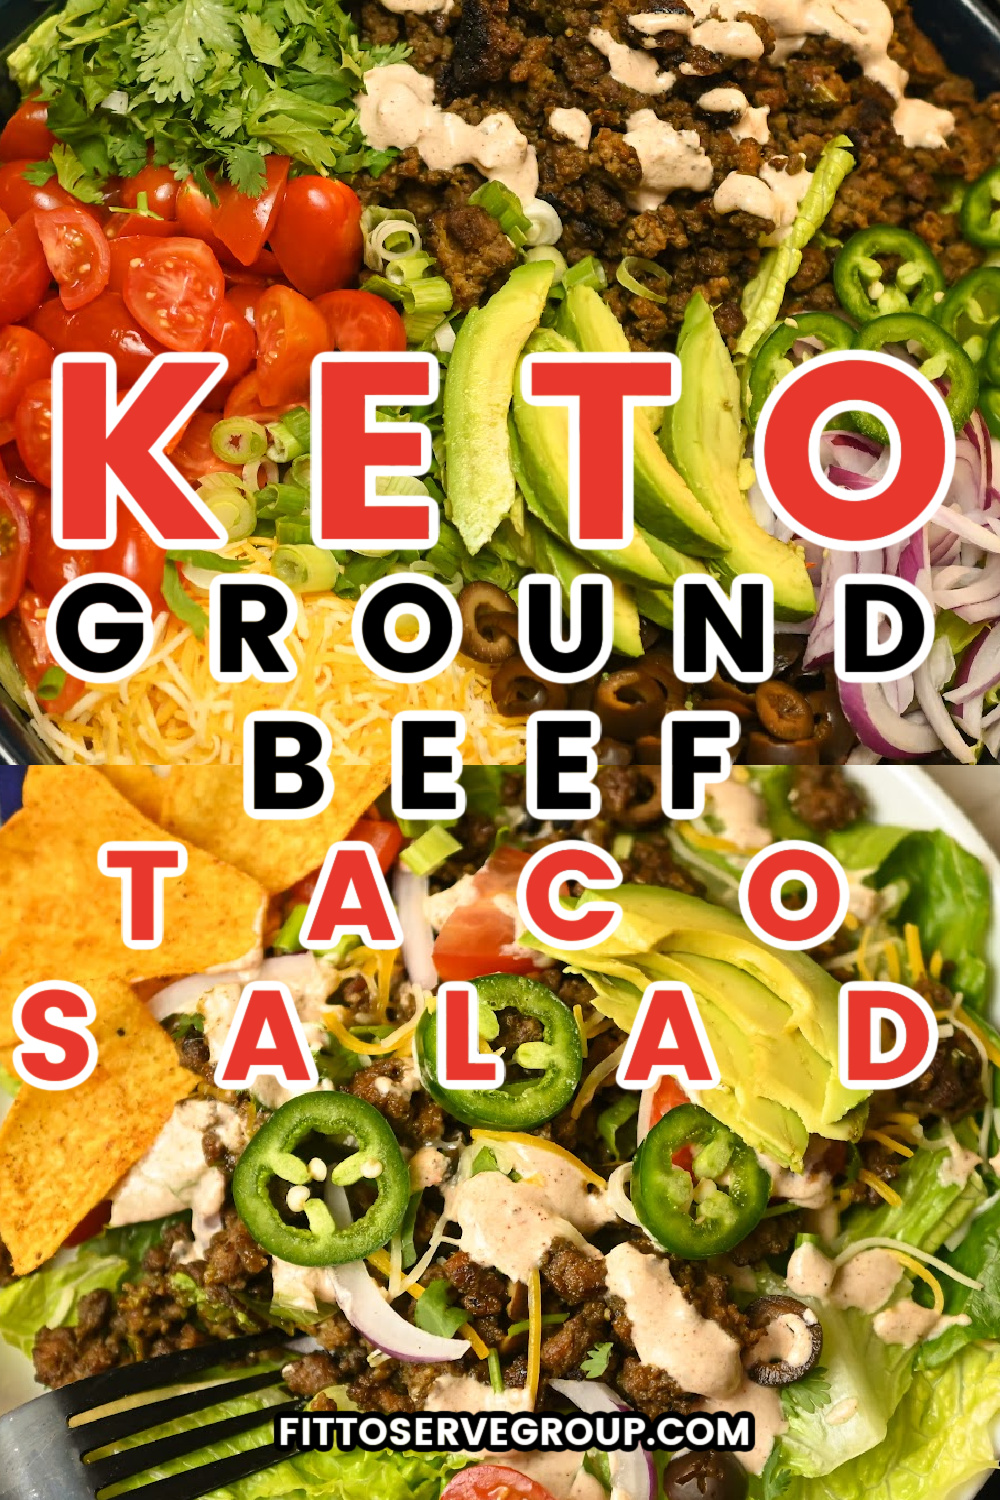 keto ground beef taco salad made in 20 minutes